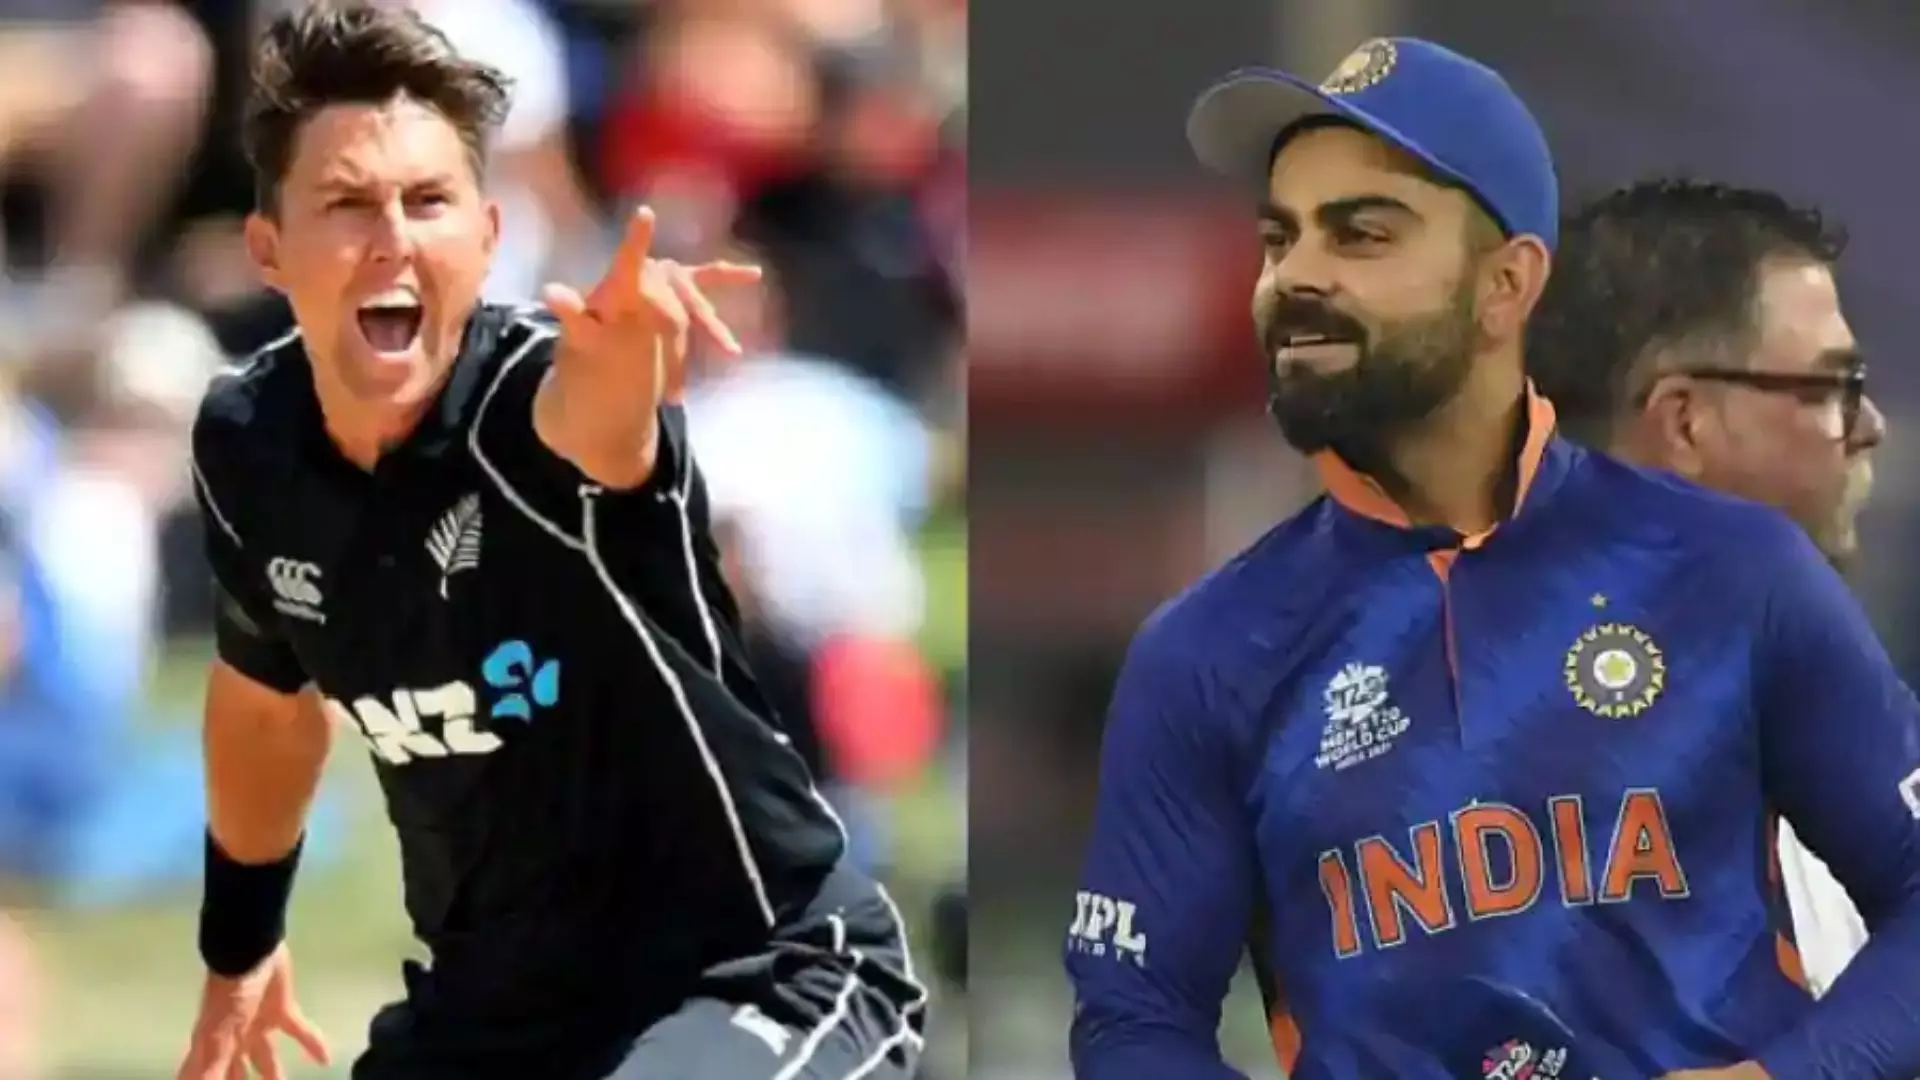 New Zealand Bowler Trent Boult Says i will Attack Team India Batsman with my Bowling